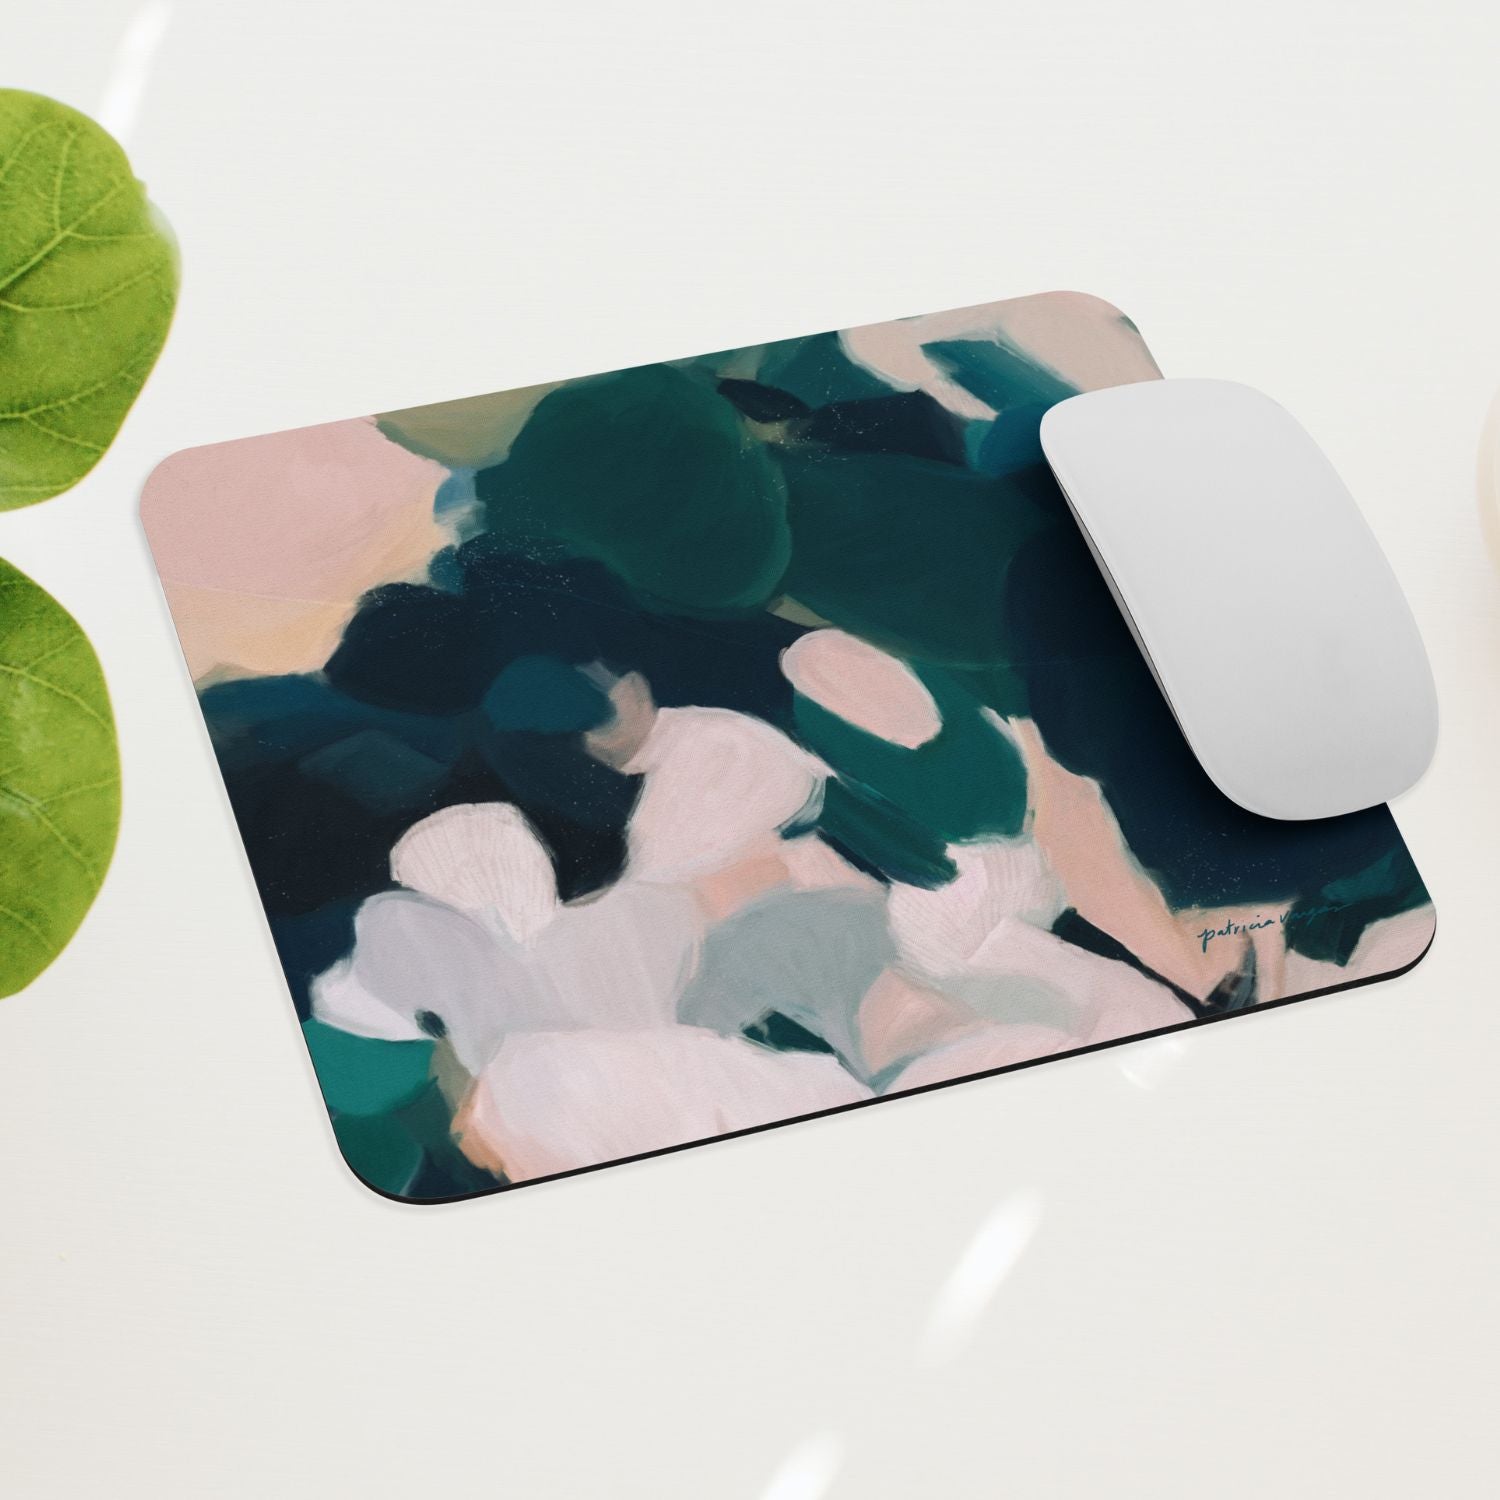 Aerwyn, green and pink mouse pad for styling your office desk. Featuring artwork by Parima Studio. Home office styling accessories, cubicle styling accessories.